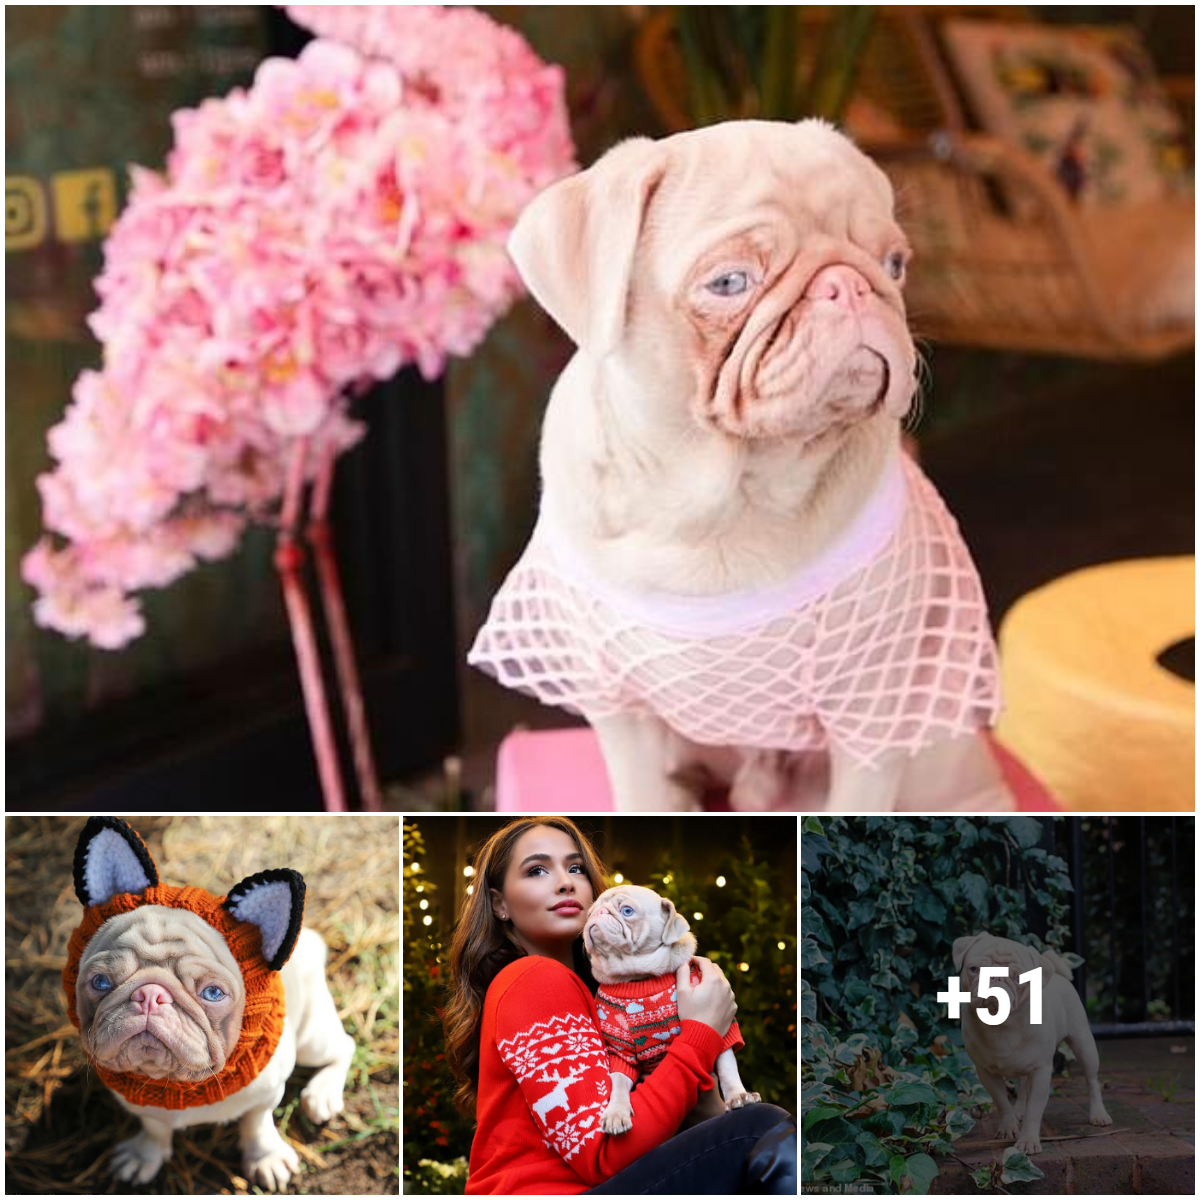 A rare albino pug with pink fur becomes an Instagram sensation as its owner documents his life with dinner dates, spa treatments and photo shoots